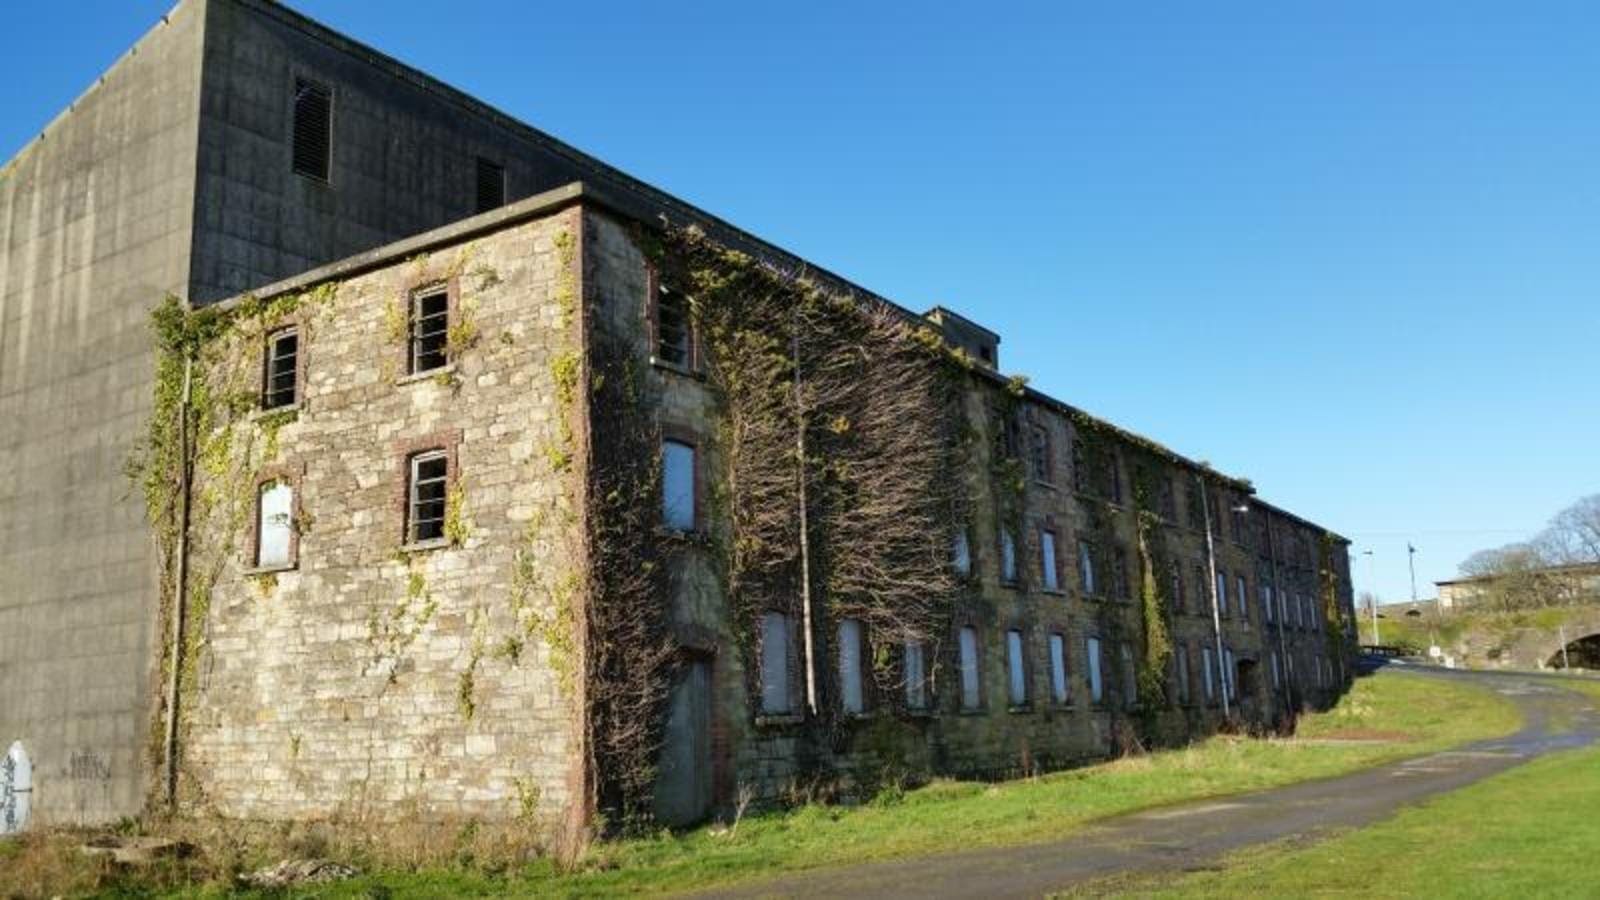 Irish alcoholic beverages company Gortinore invests US$8m in development of new Whiskey Distillery